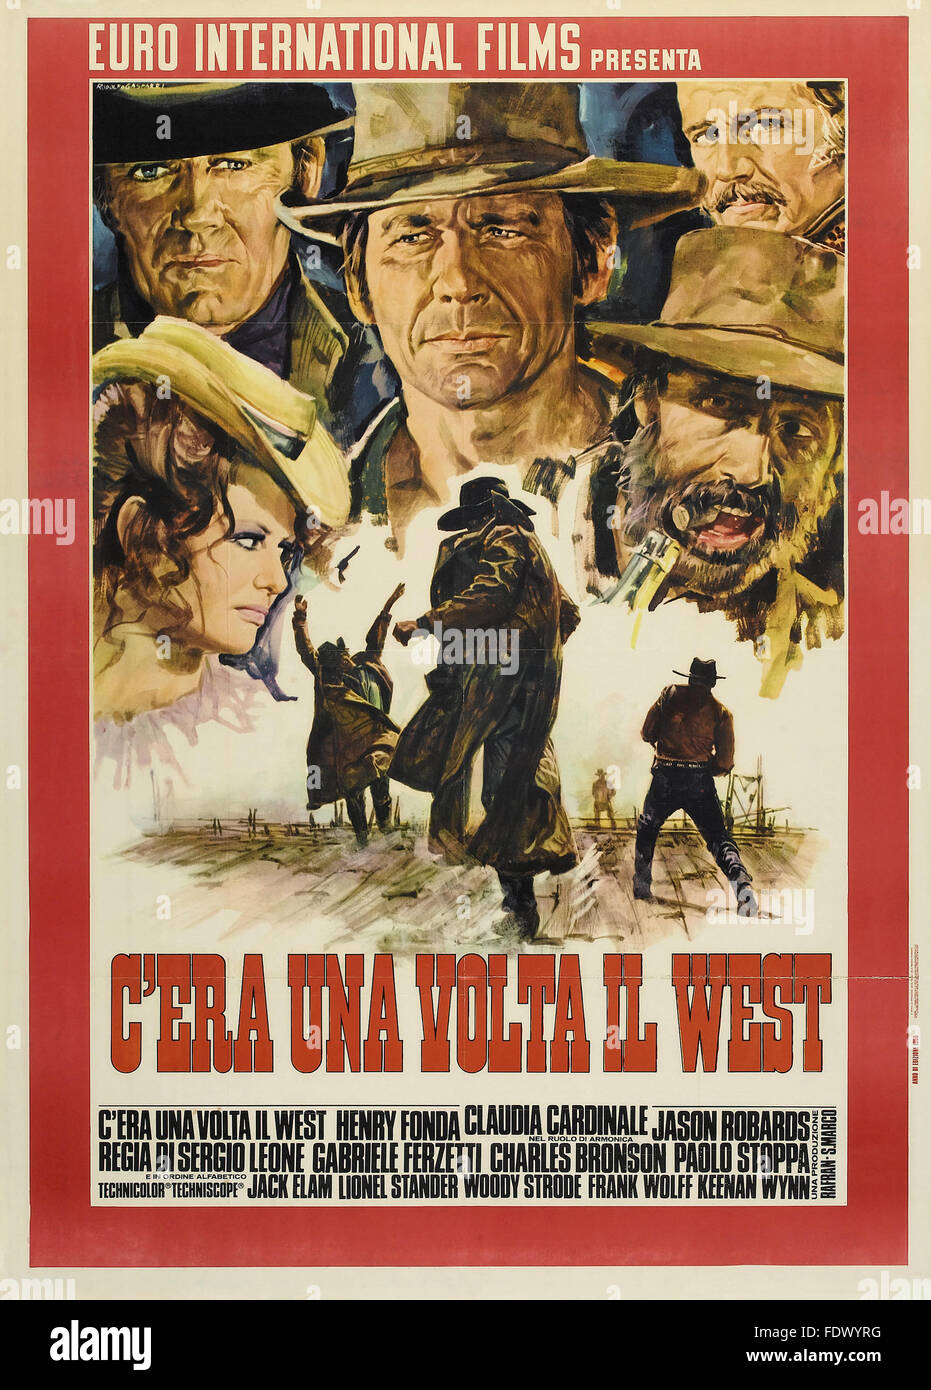 Once Upon a Time in the West - Italian Movie Poster Stock Photo - Alamy